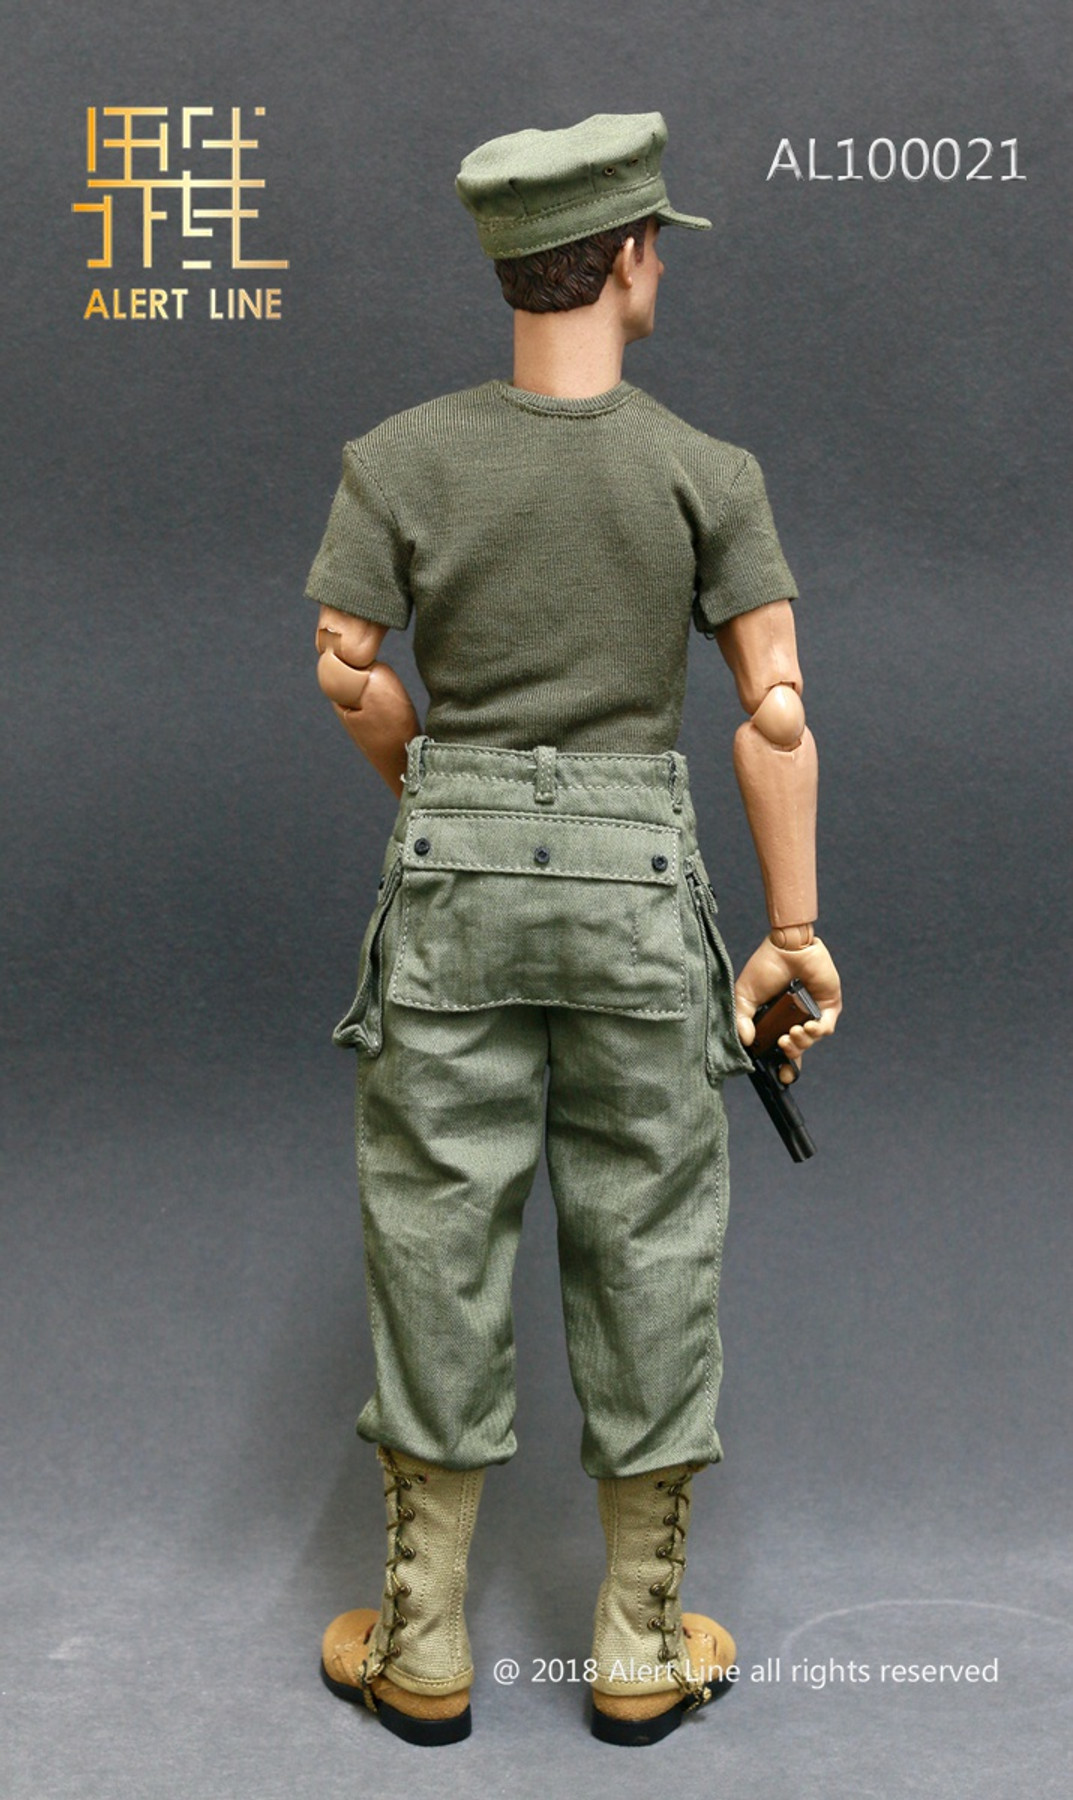 Alert Line USMC tee shirt 1/6th scale toy accessory 